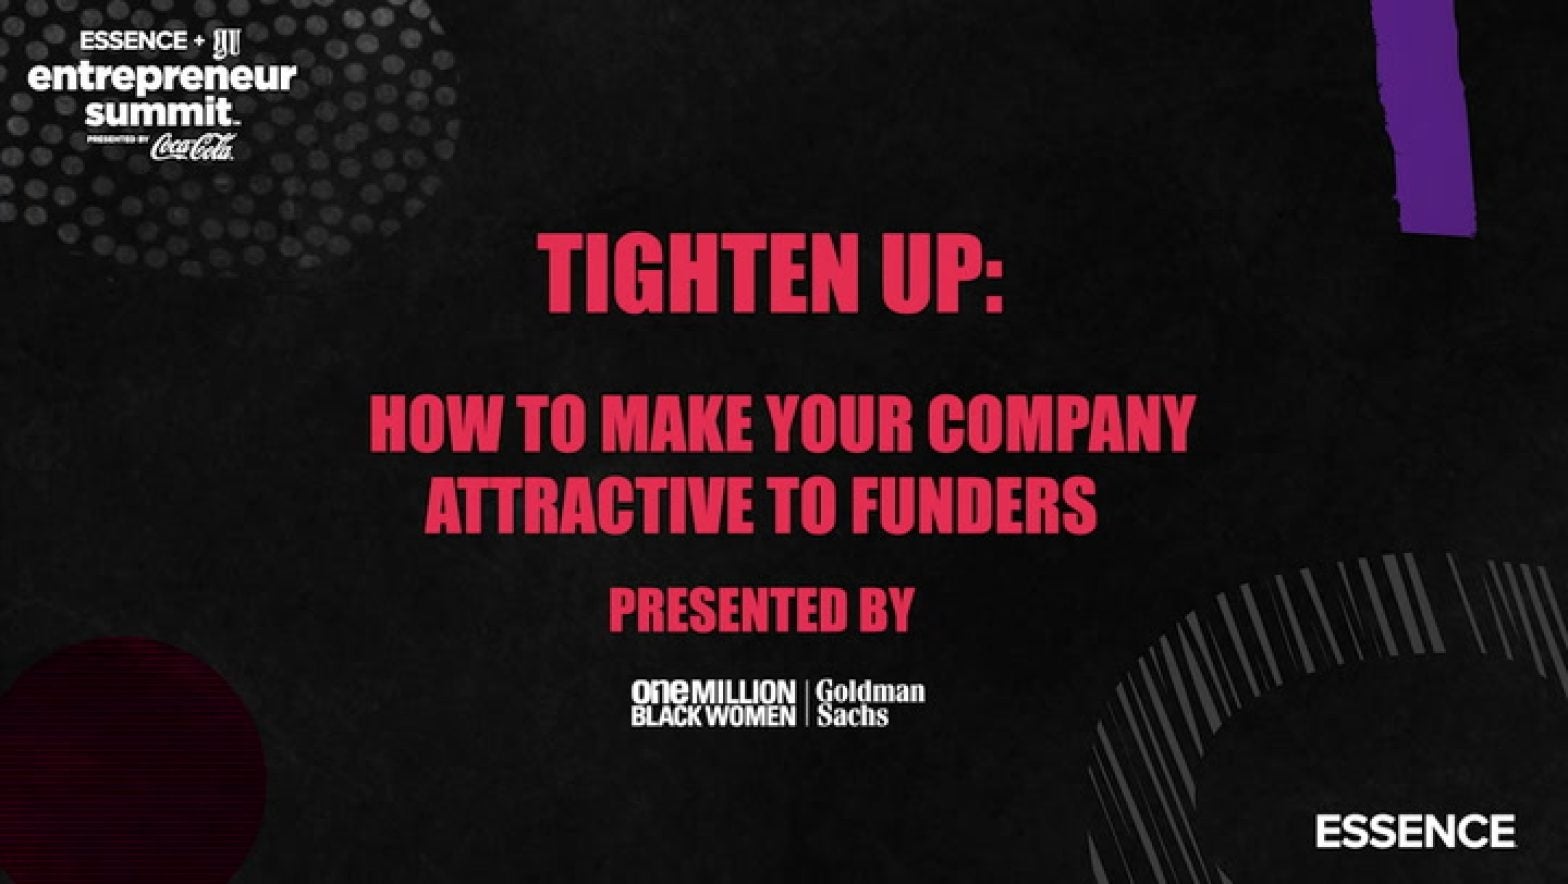 Entrepreneur Summit | Tighten Up! How To Make Your Company Attractive To Funders